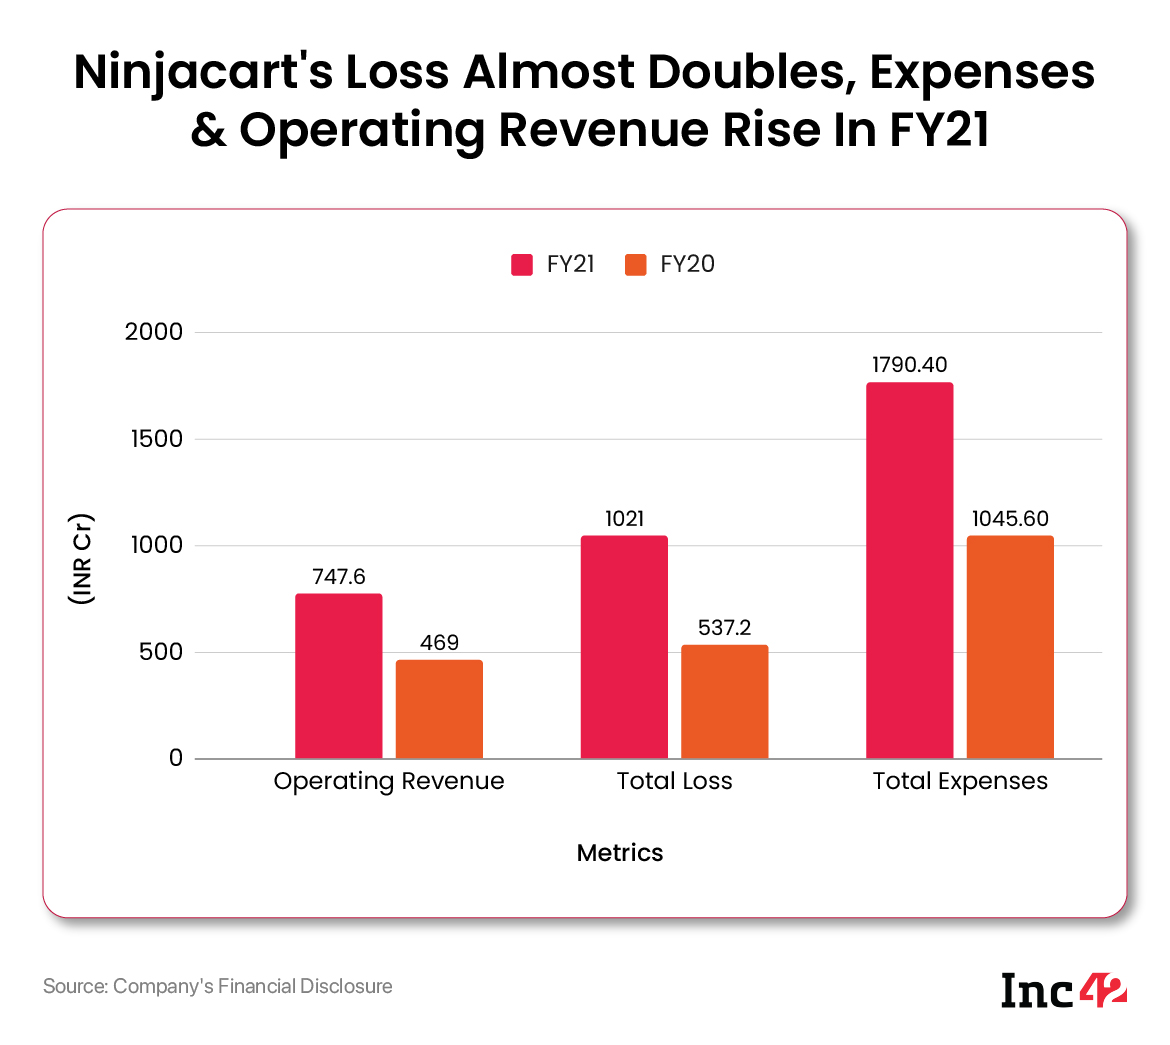 Ninjacart FY21 Loss Nearly Doubles To INR 1,021 Cr, Expenses Up 71% Despite Cost-Cutting Measures